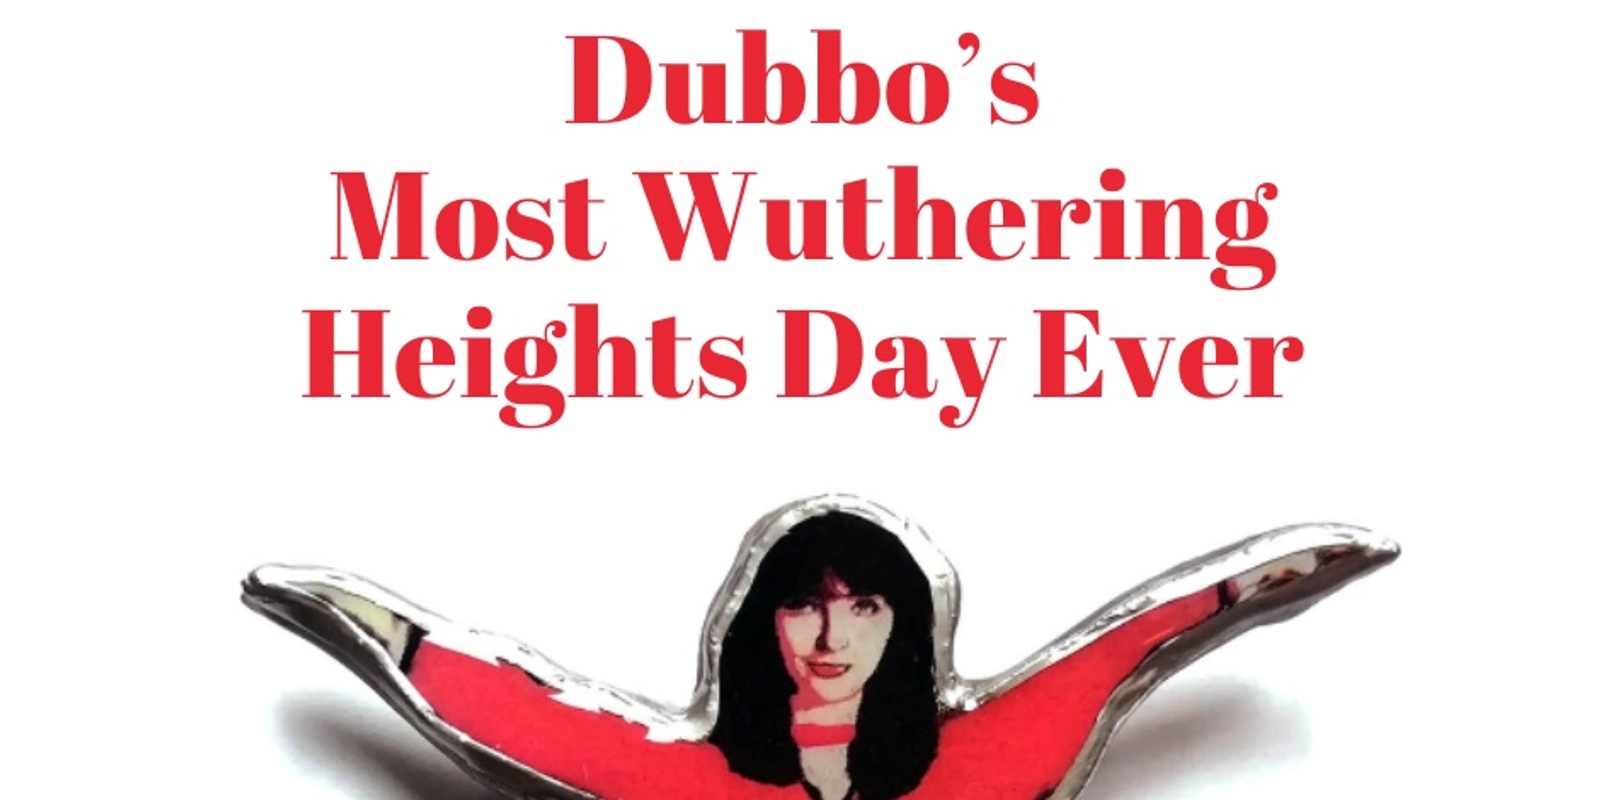 Banner image for Most Wuthering Heights Day - Dubbo